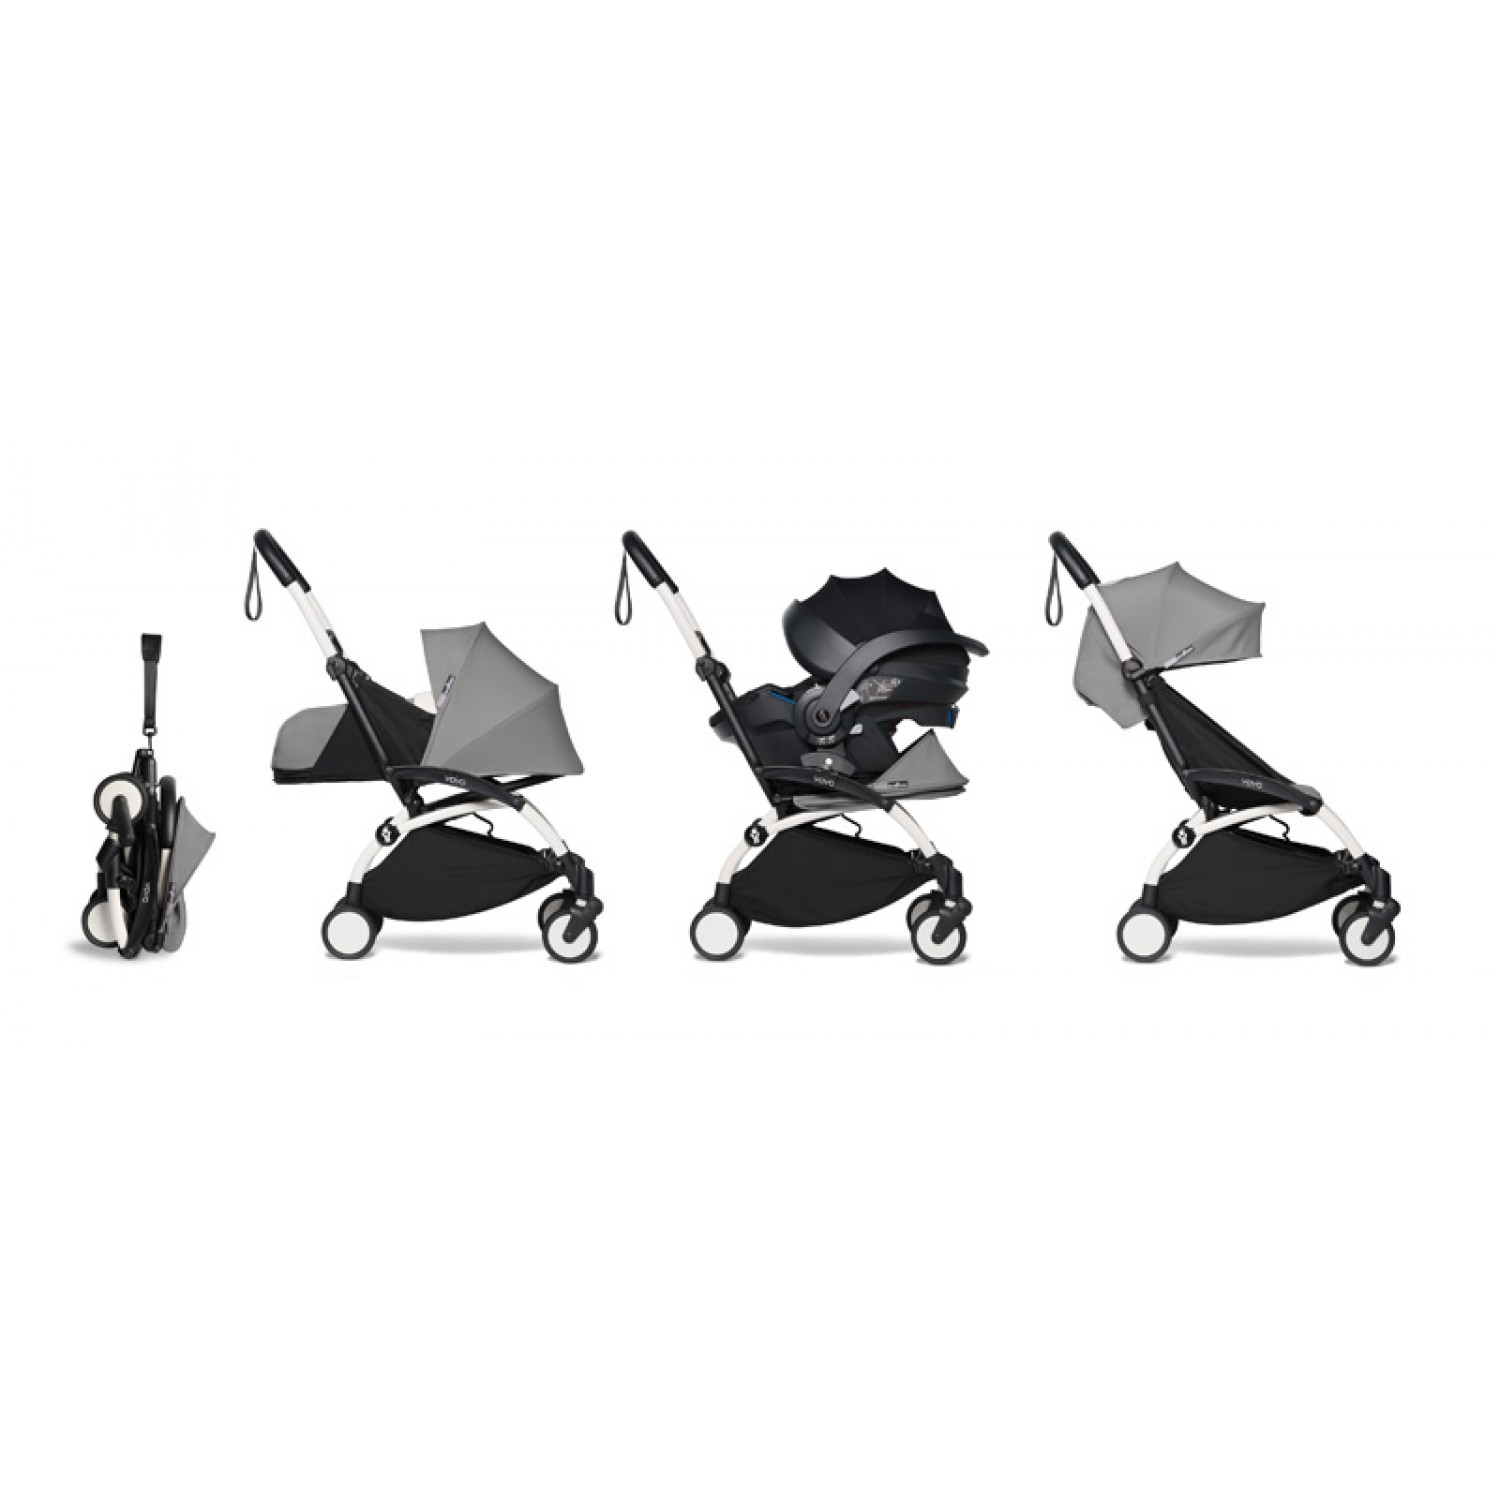 All-in-one BABYZEN stroller YOYO2 0+, car seat and 6+   | White Chassis Grey